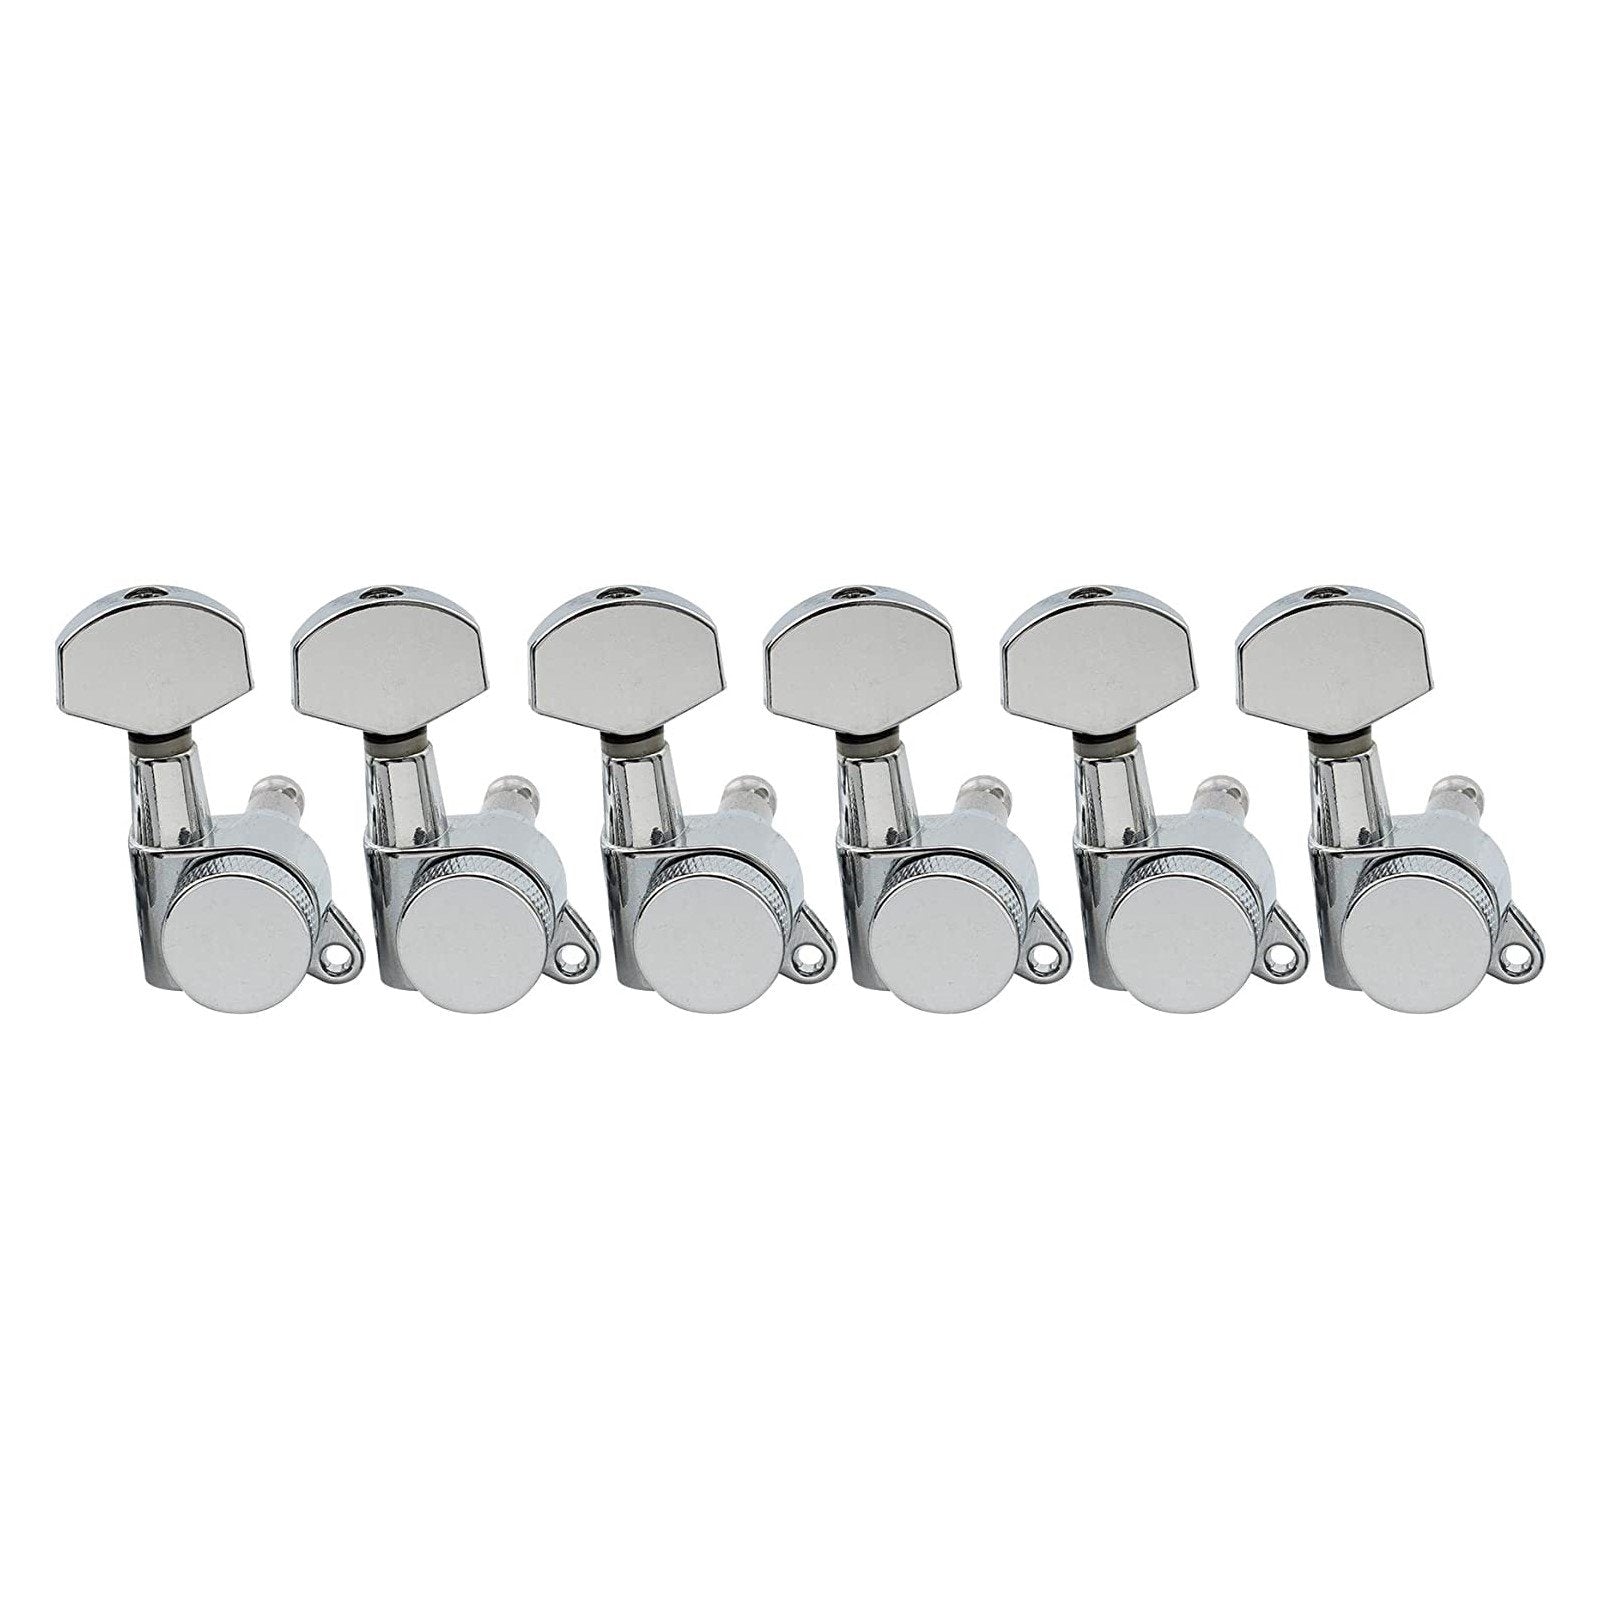 6-in-line Right Hand Locking Guitar Tuning Pegs, Chrome